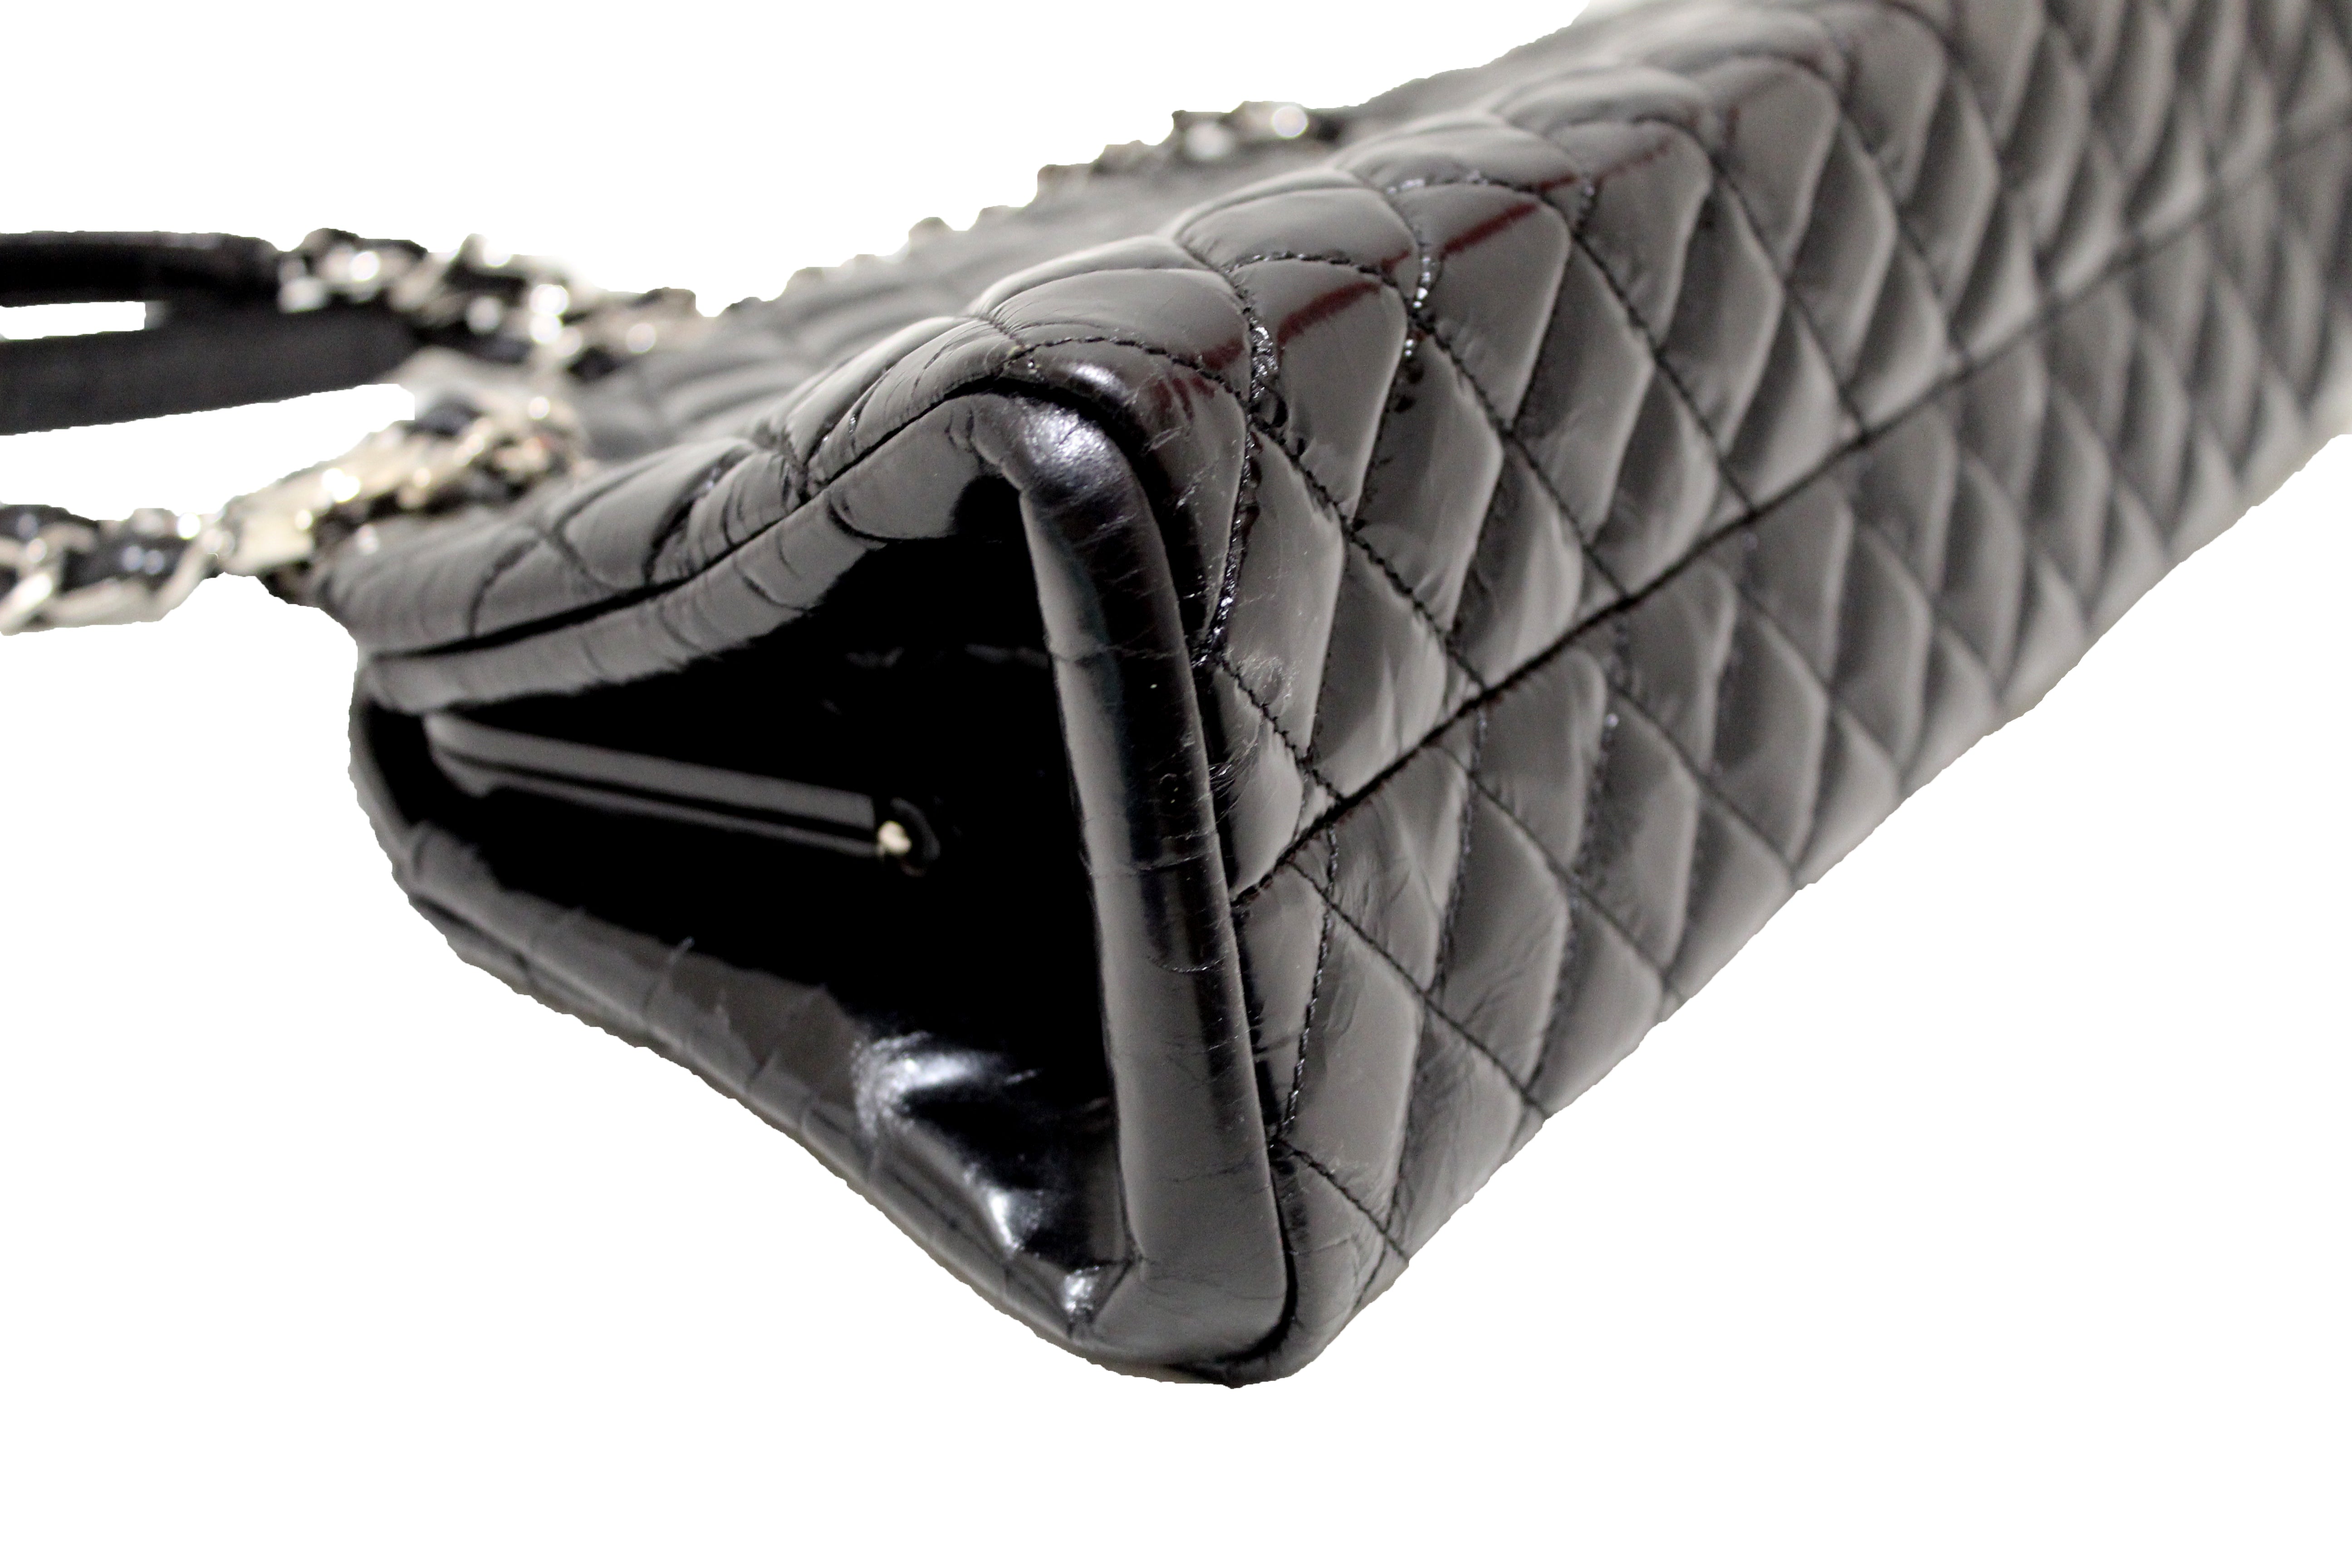 Authentic Chanel Black Patent Quilted Medium Just Mademoiselle